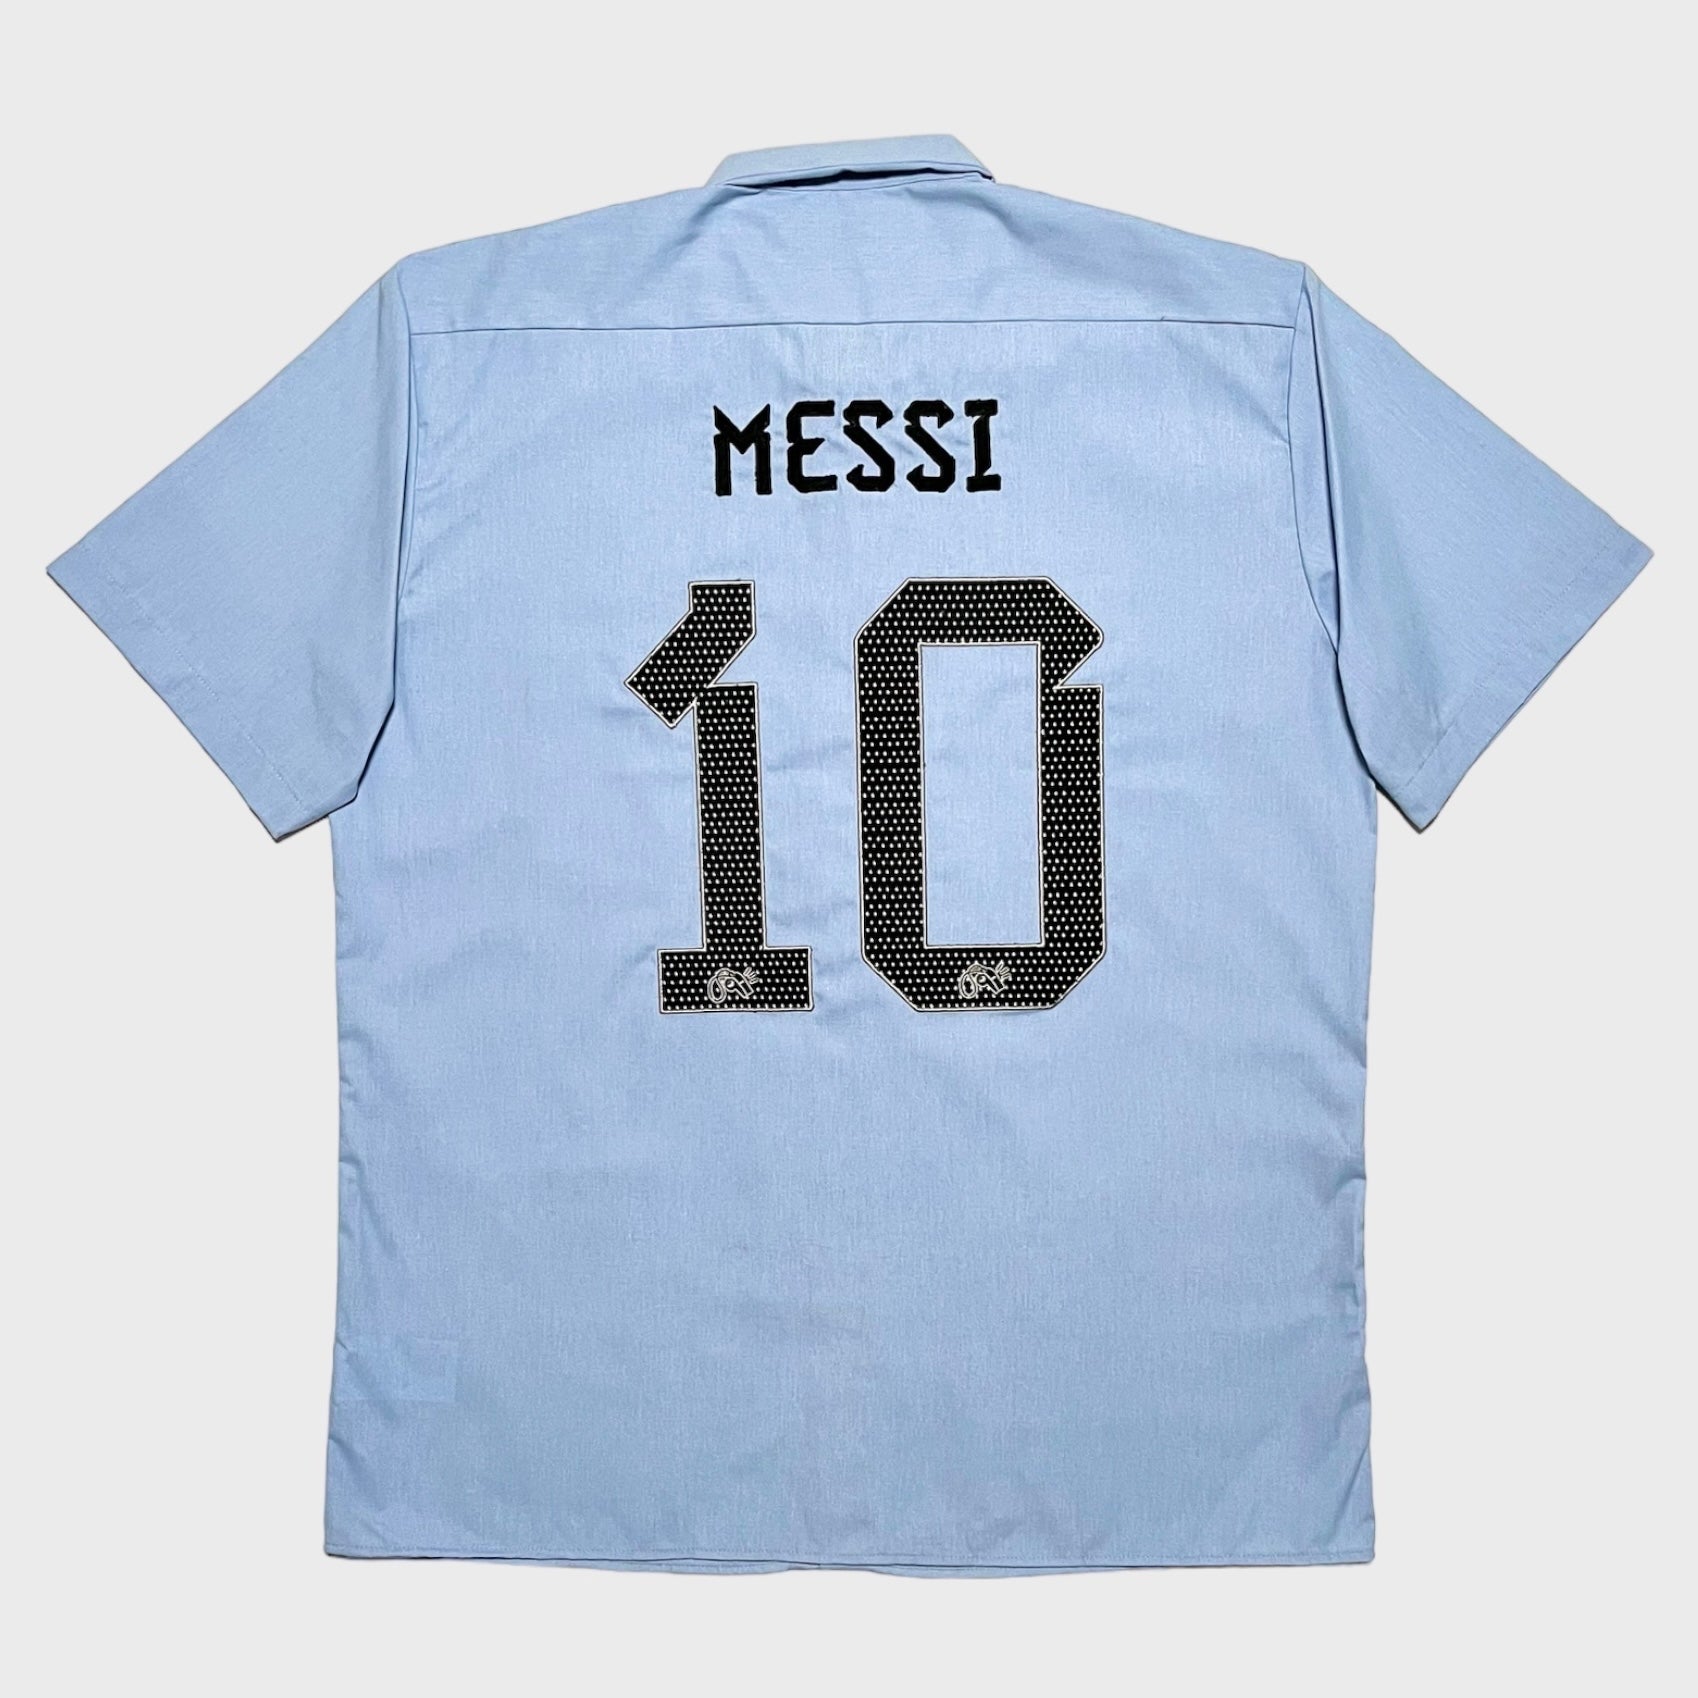 Argentina JRSY Work Shirt - Authentic